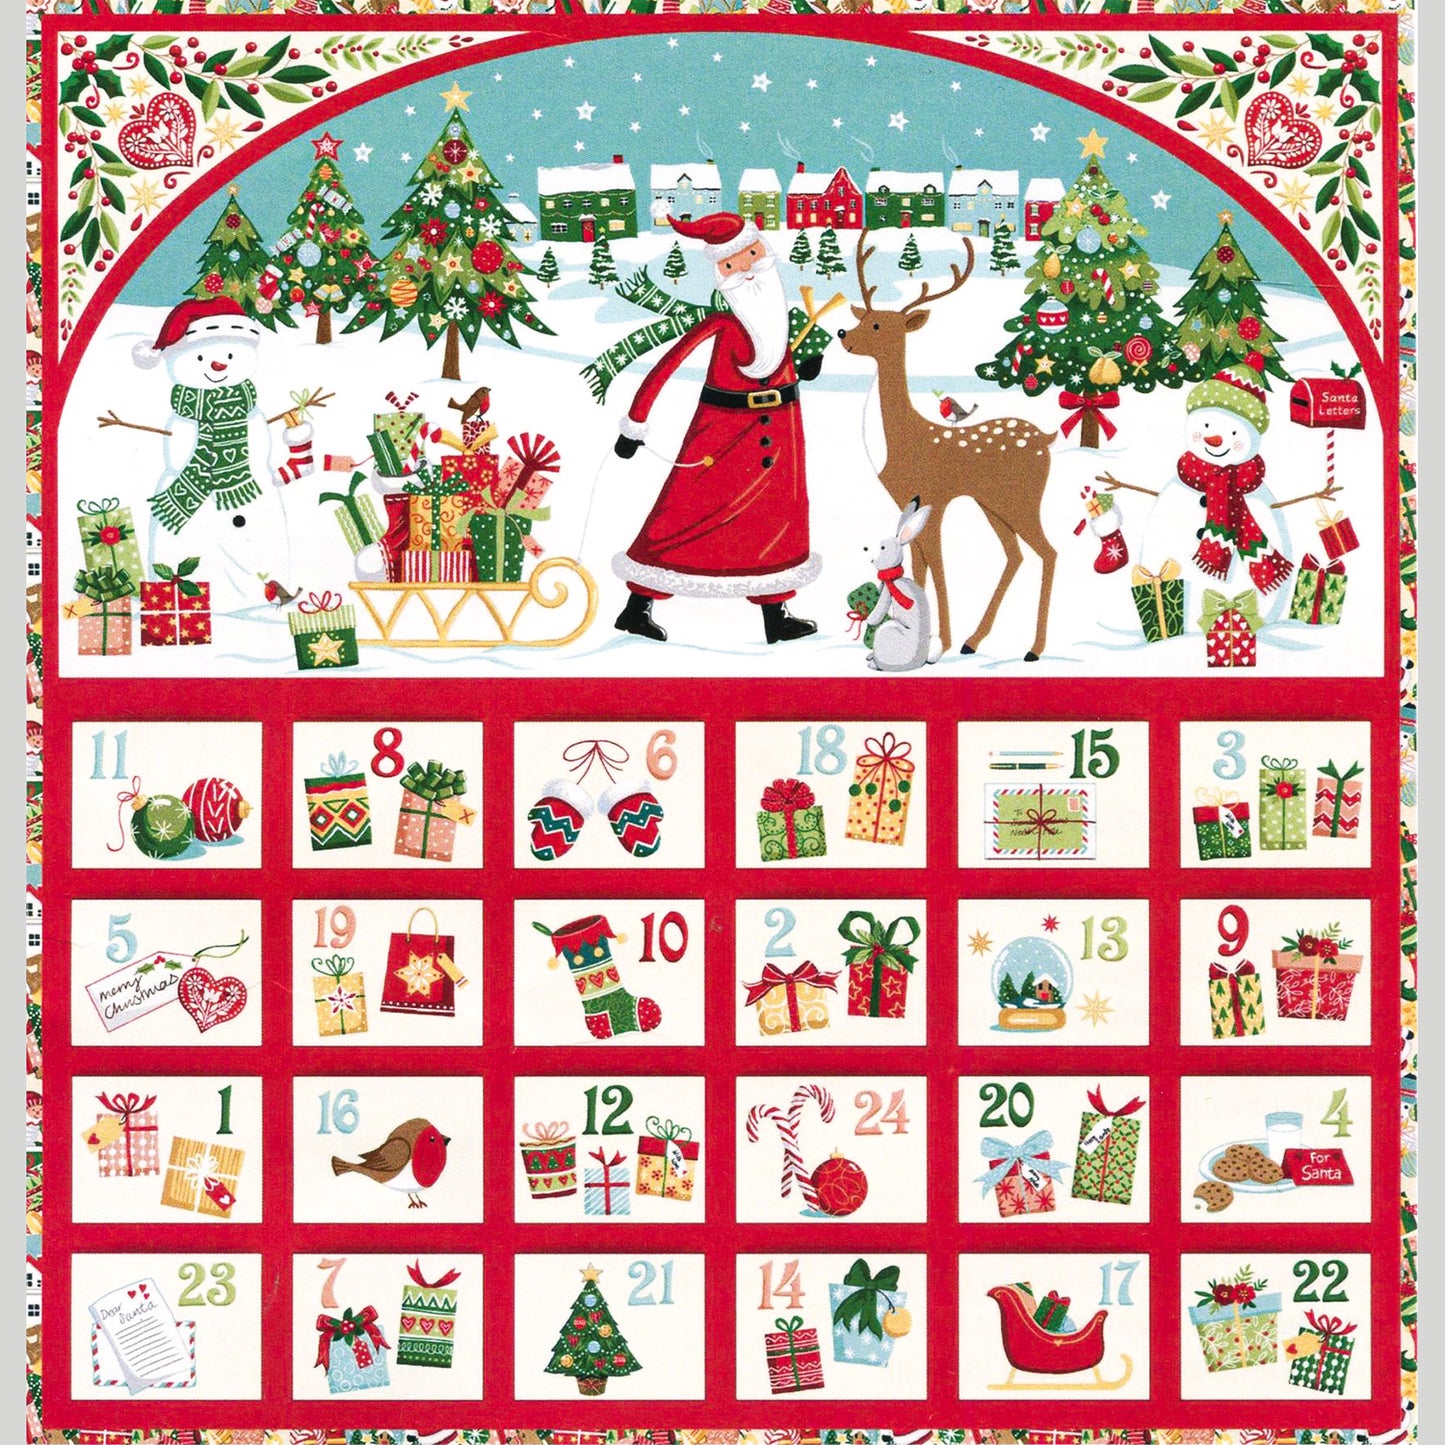 Christmas Wishes Advent Calendar kit Primary Image